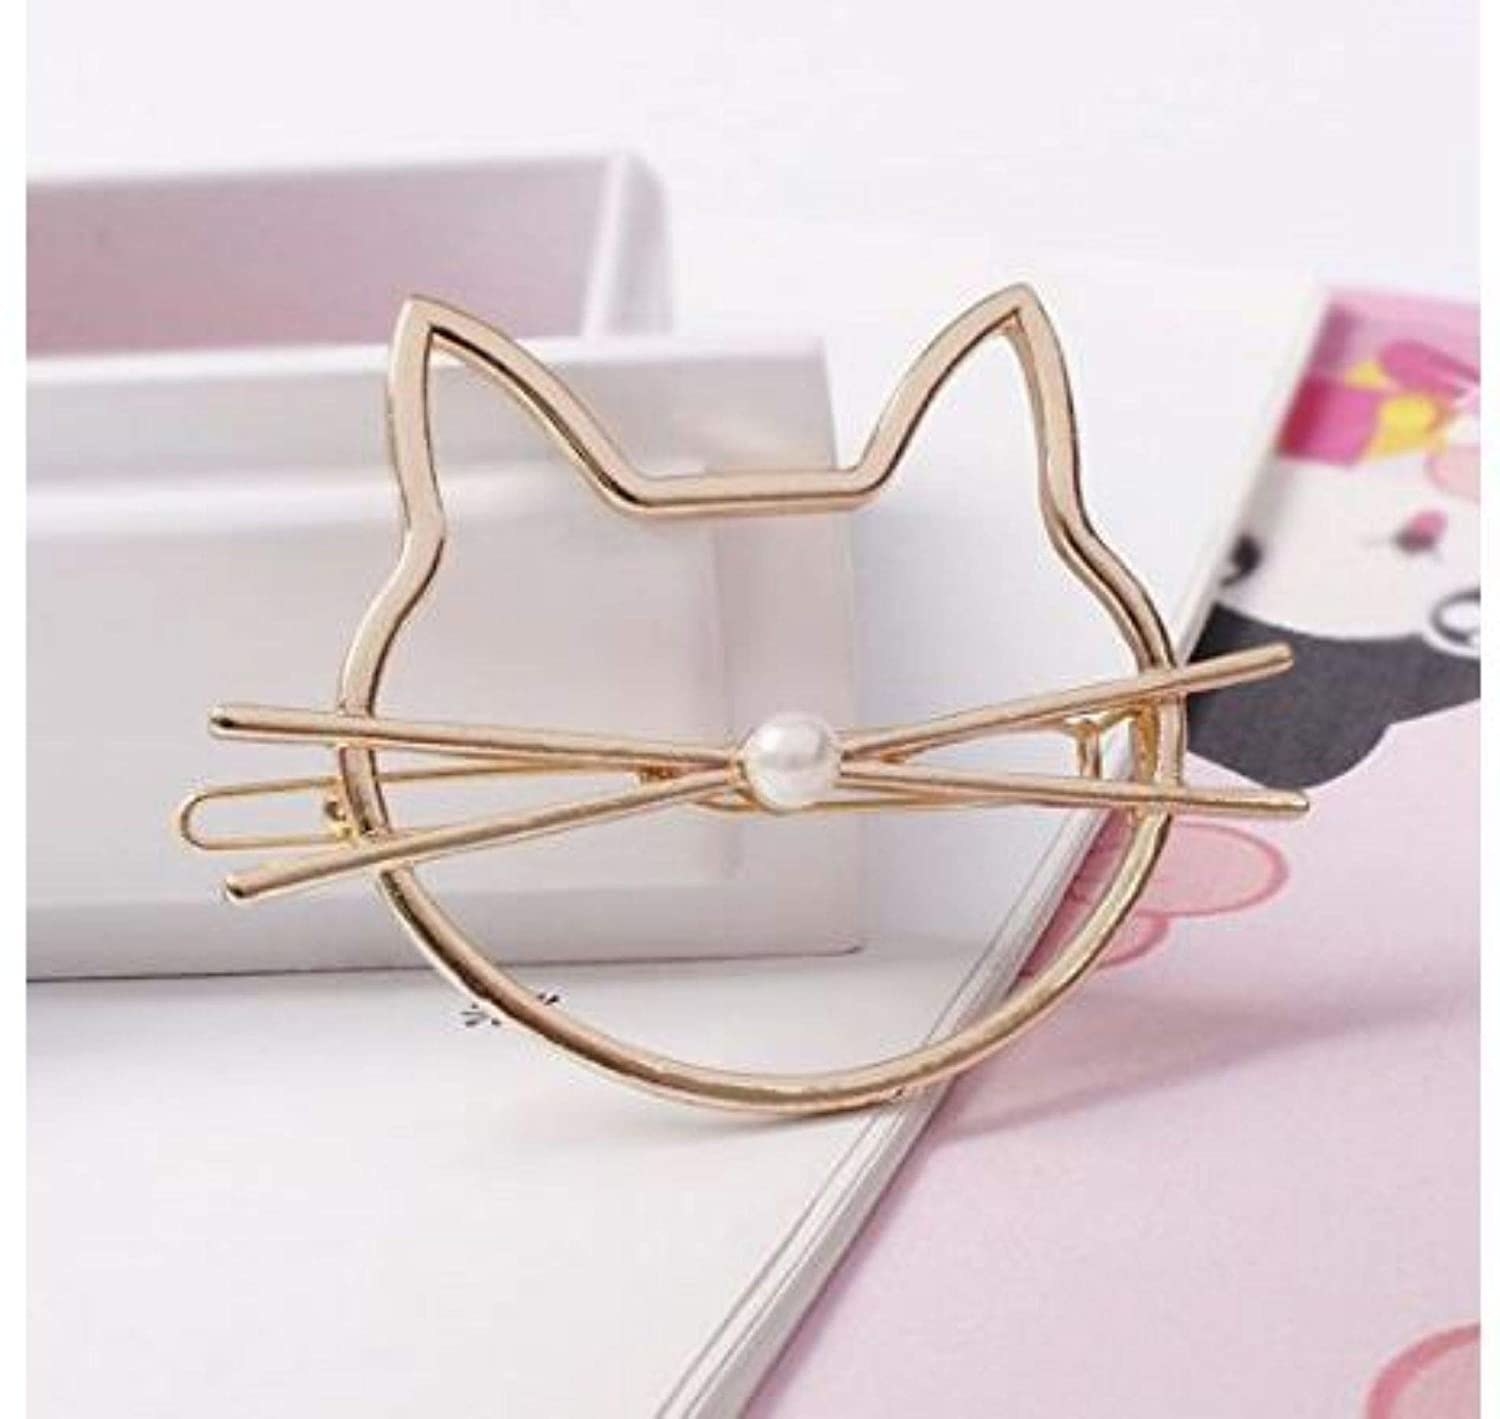 Gold-plated cat hair pin with pearl nose and whiskers